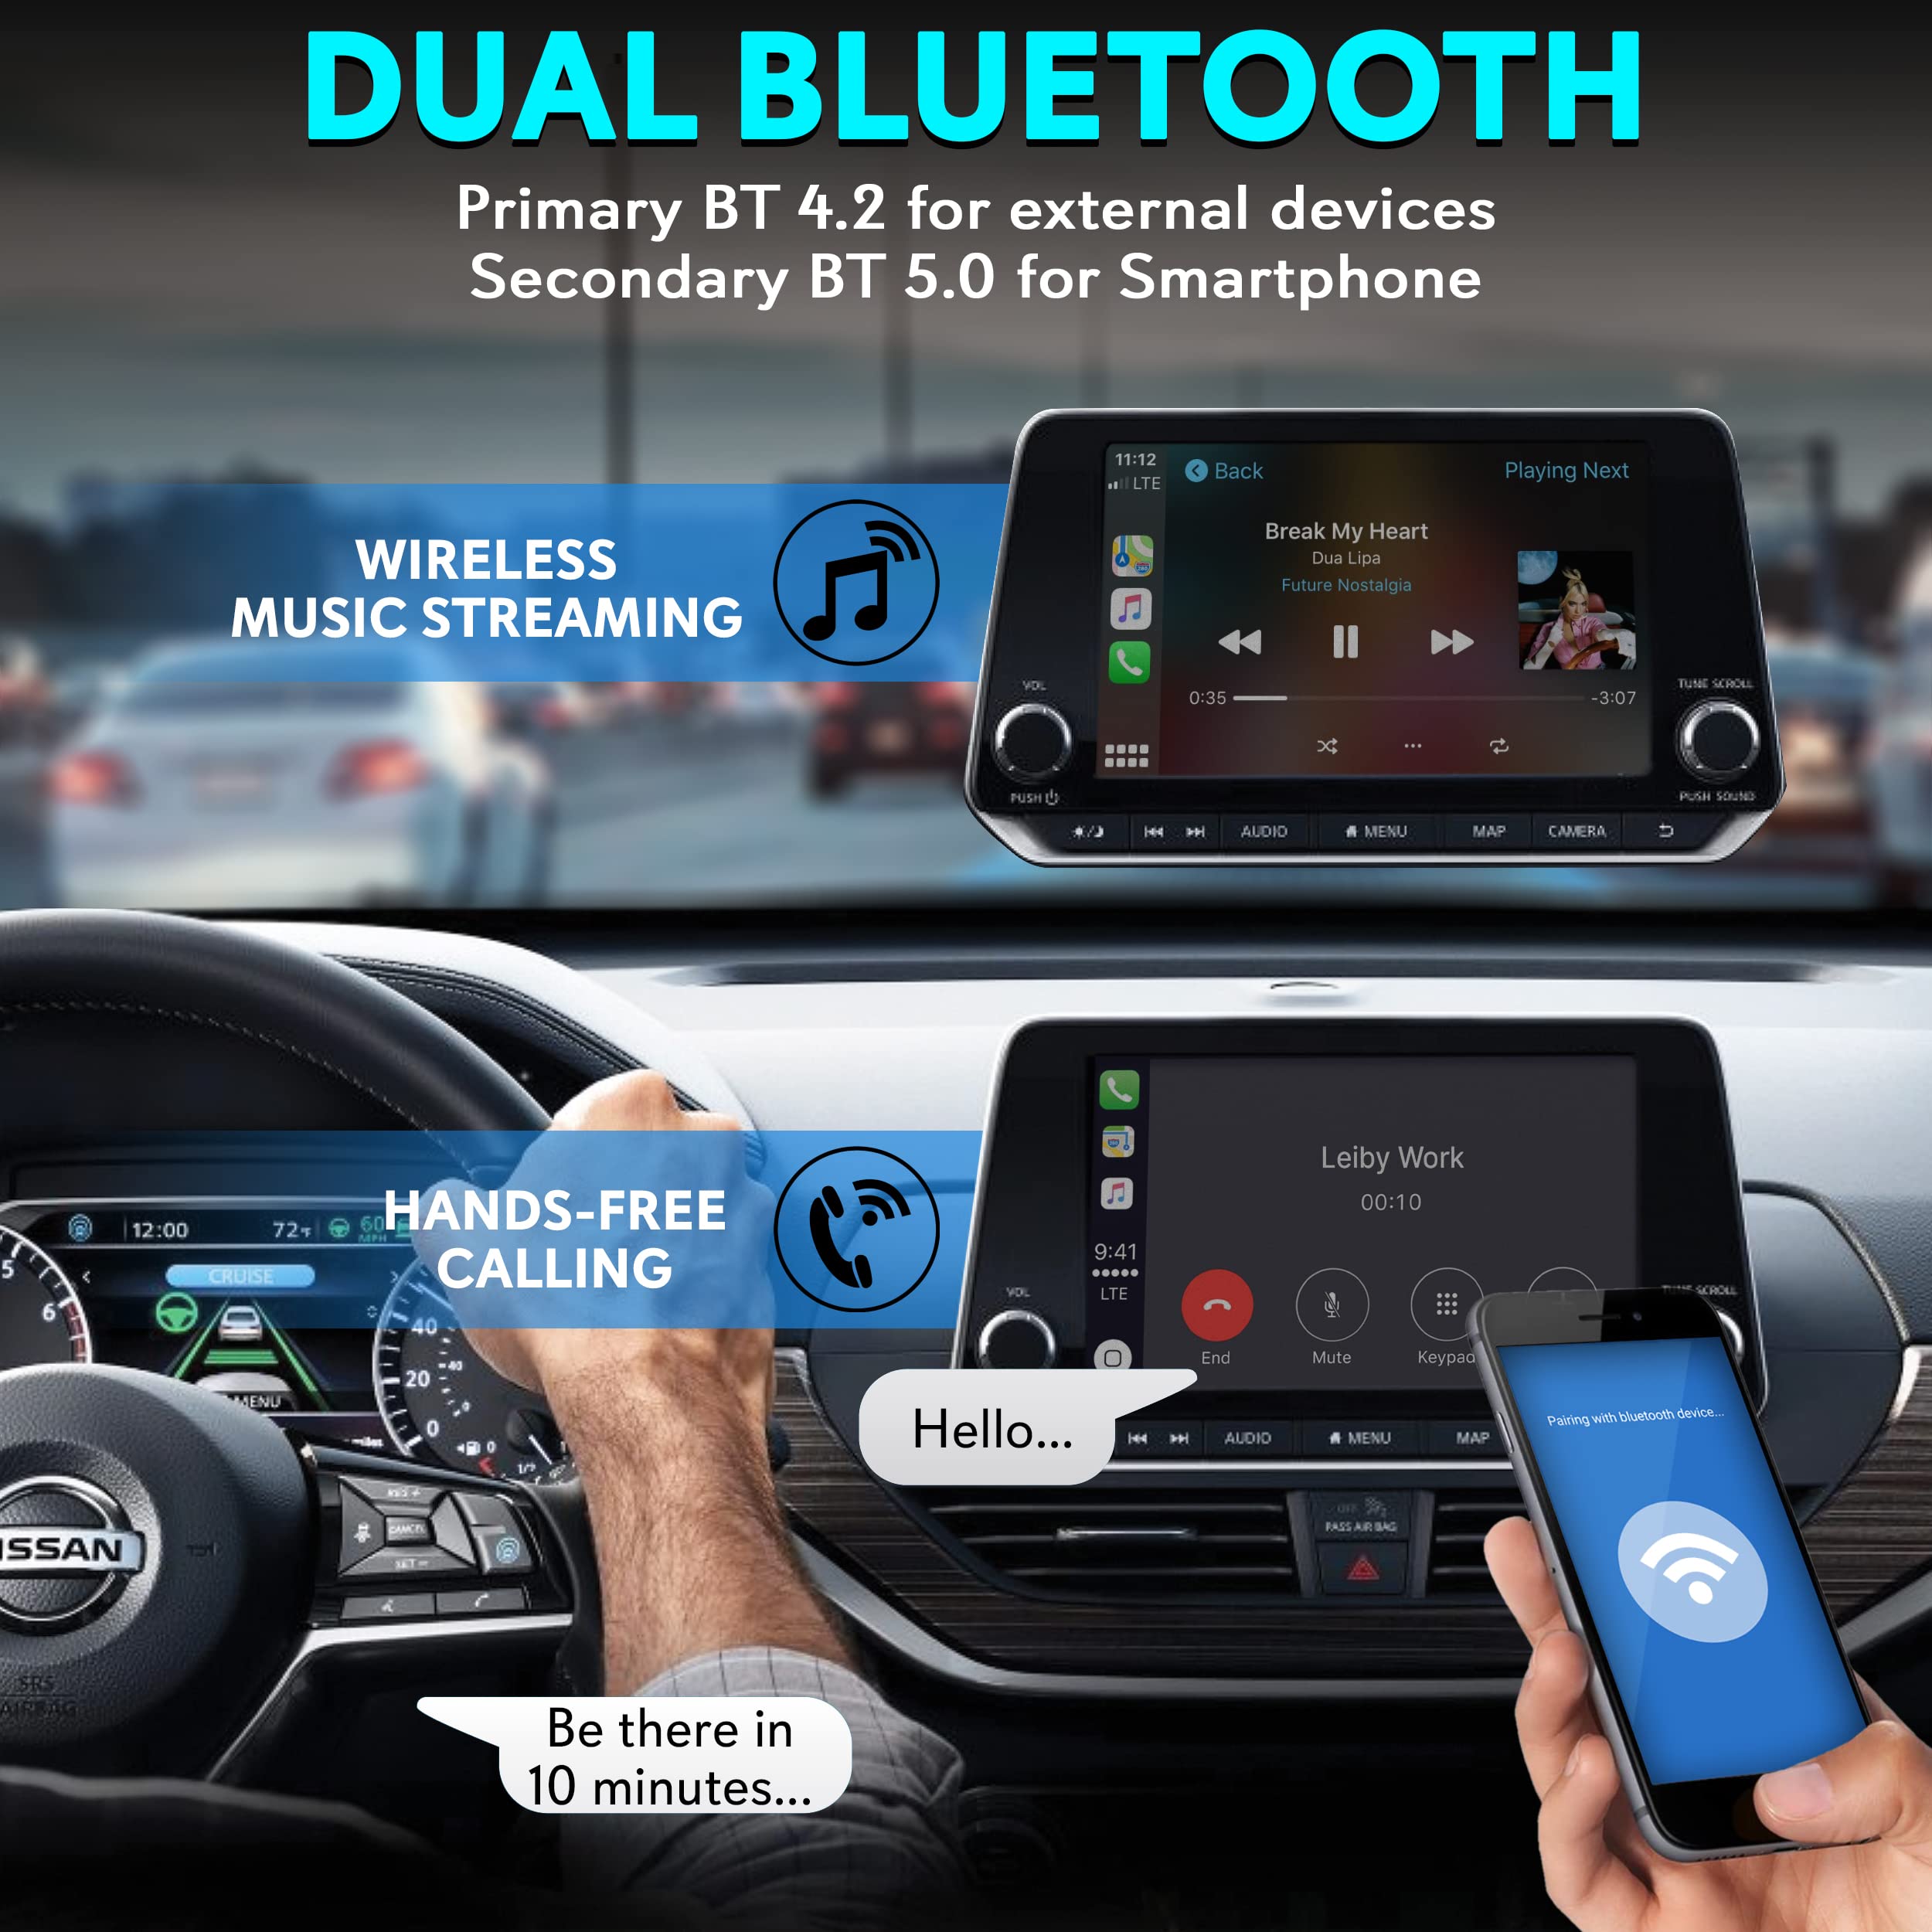 Pyle Wireless Carplay iA Box, 4GB RAM 64GB ROM, 2.4GHz, 5GHz Dual Band WiFi BT Octa Core 64Bits D, 4K Full HD, H.265, USB3.0 Android Box, Screen Mirroring, Install Android Apps - PAS20BD